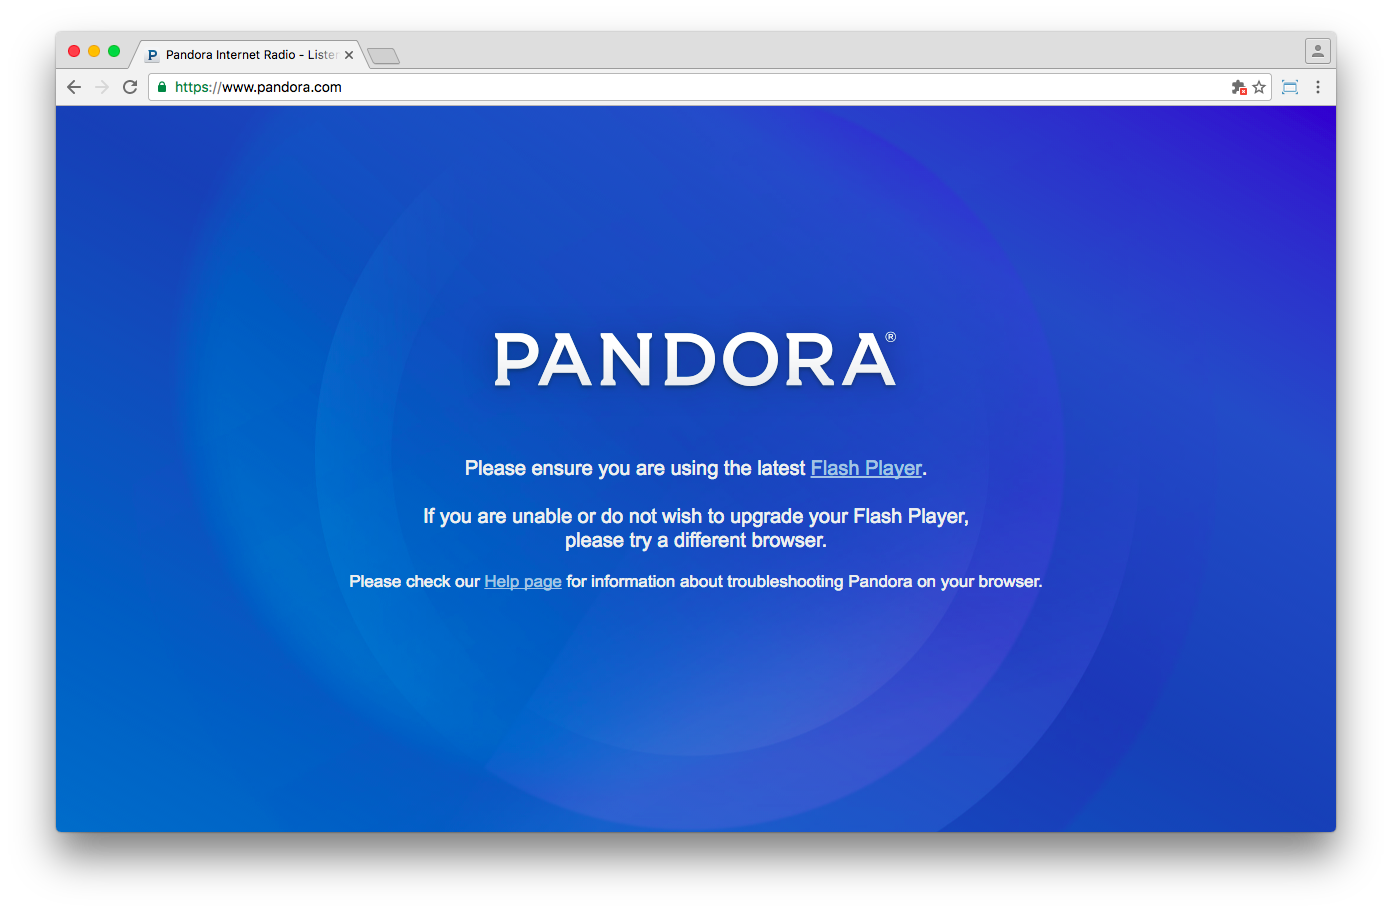 Pandora is the most adamant about needing Flash Player